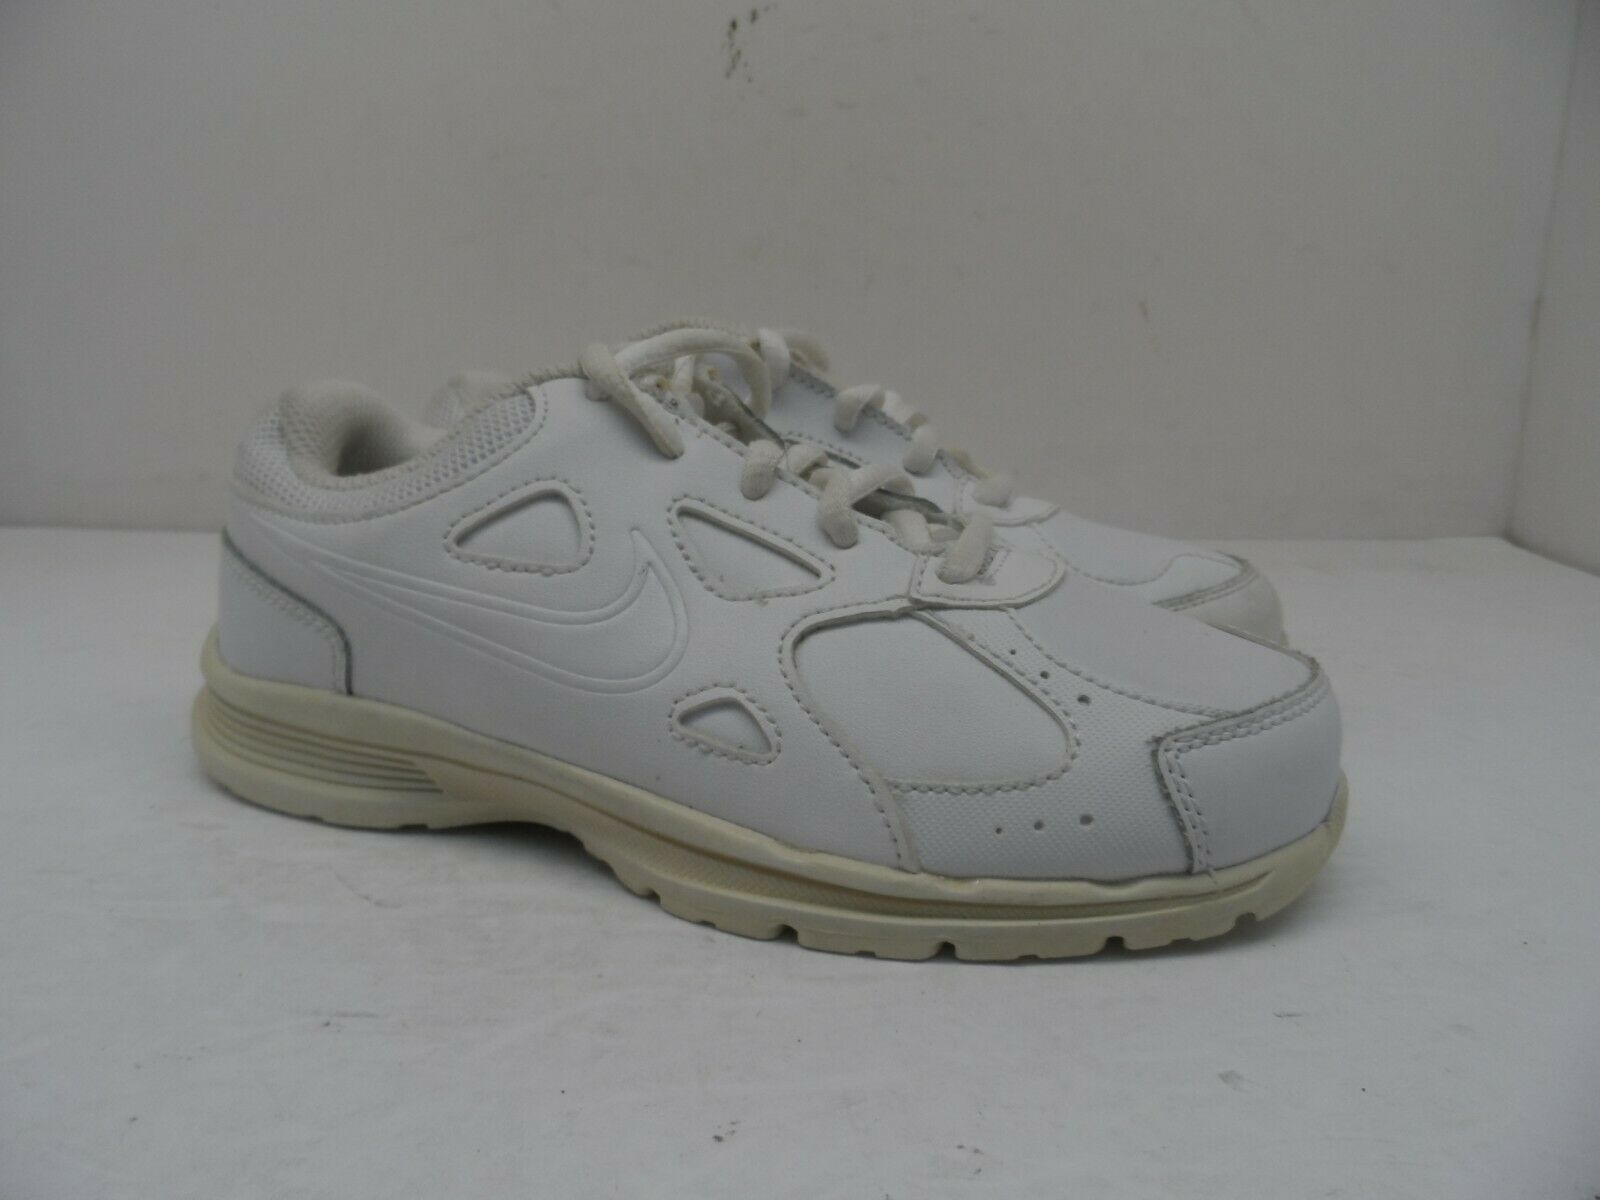 Primary image for Nike Boy's Advantage Runner 2 Athletic Shoes White *Mismates* Size 2YW & 2.5YW